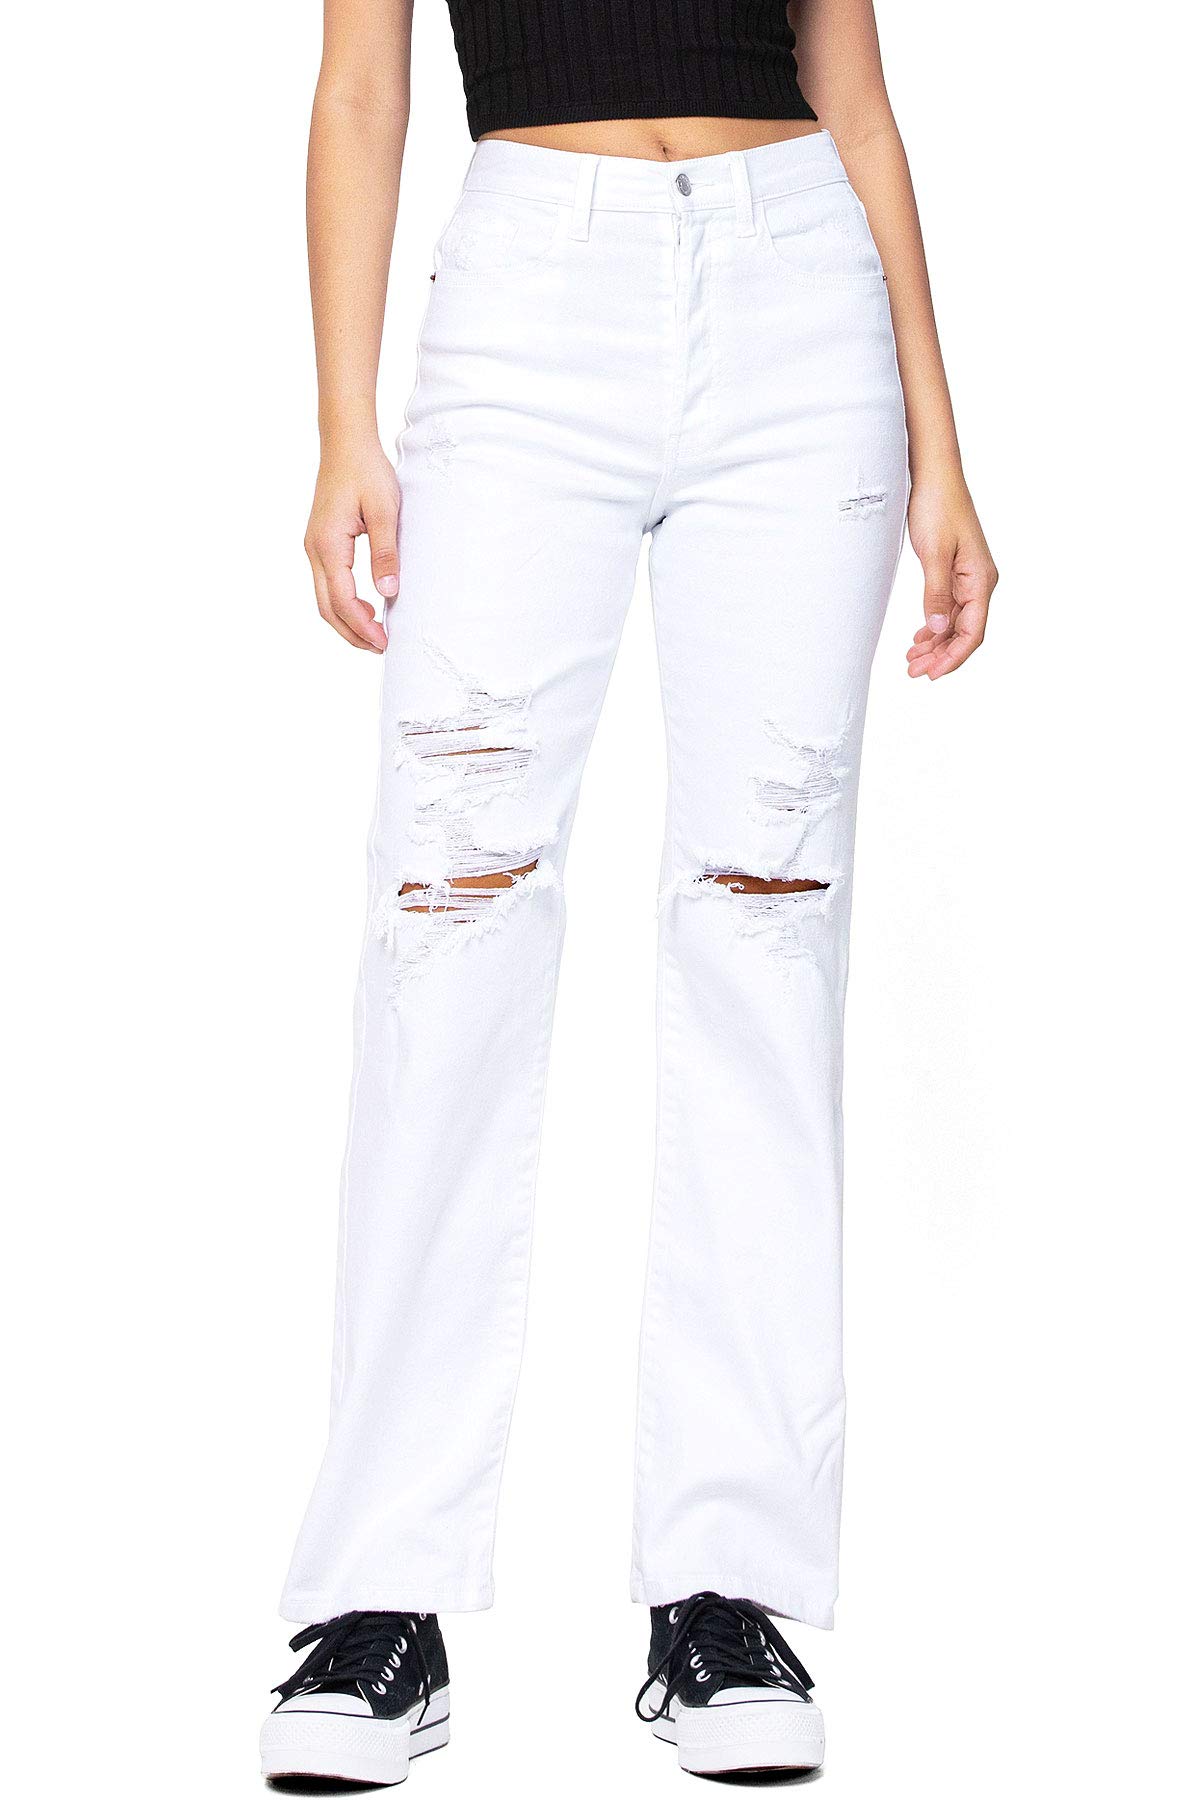 Cello Jeans Women's Juniors High Rise Straight Leg Distressed Dad Jeans (White, 3) - image 4 of 4